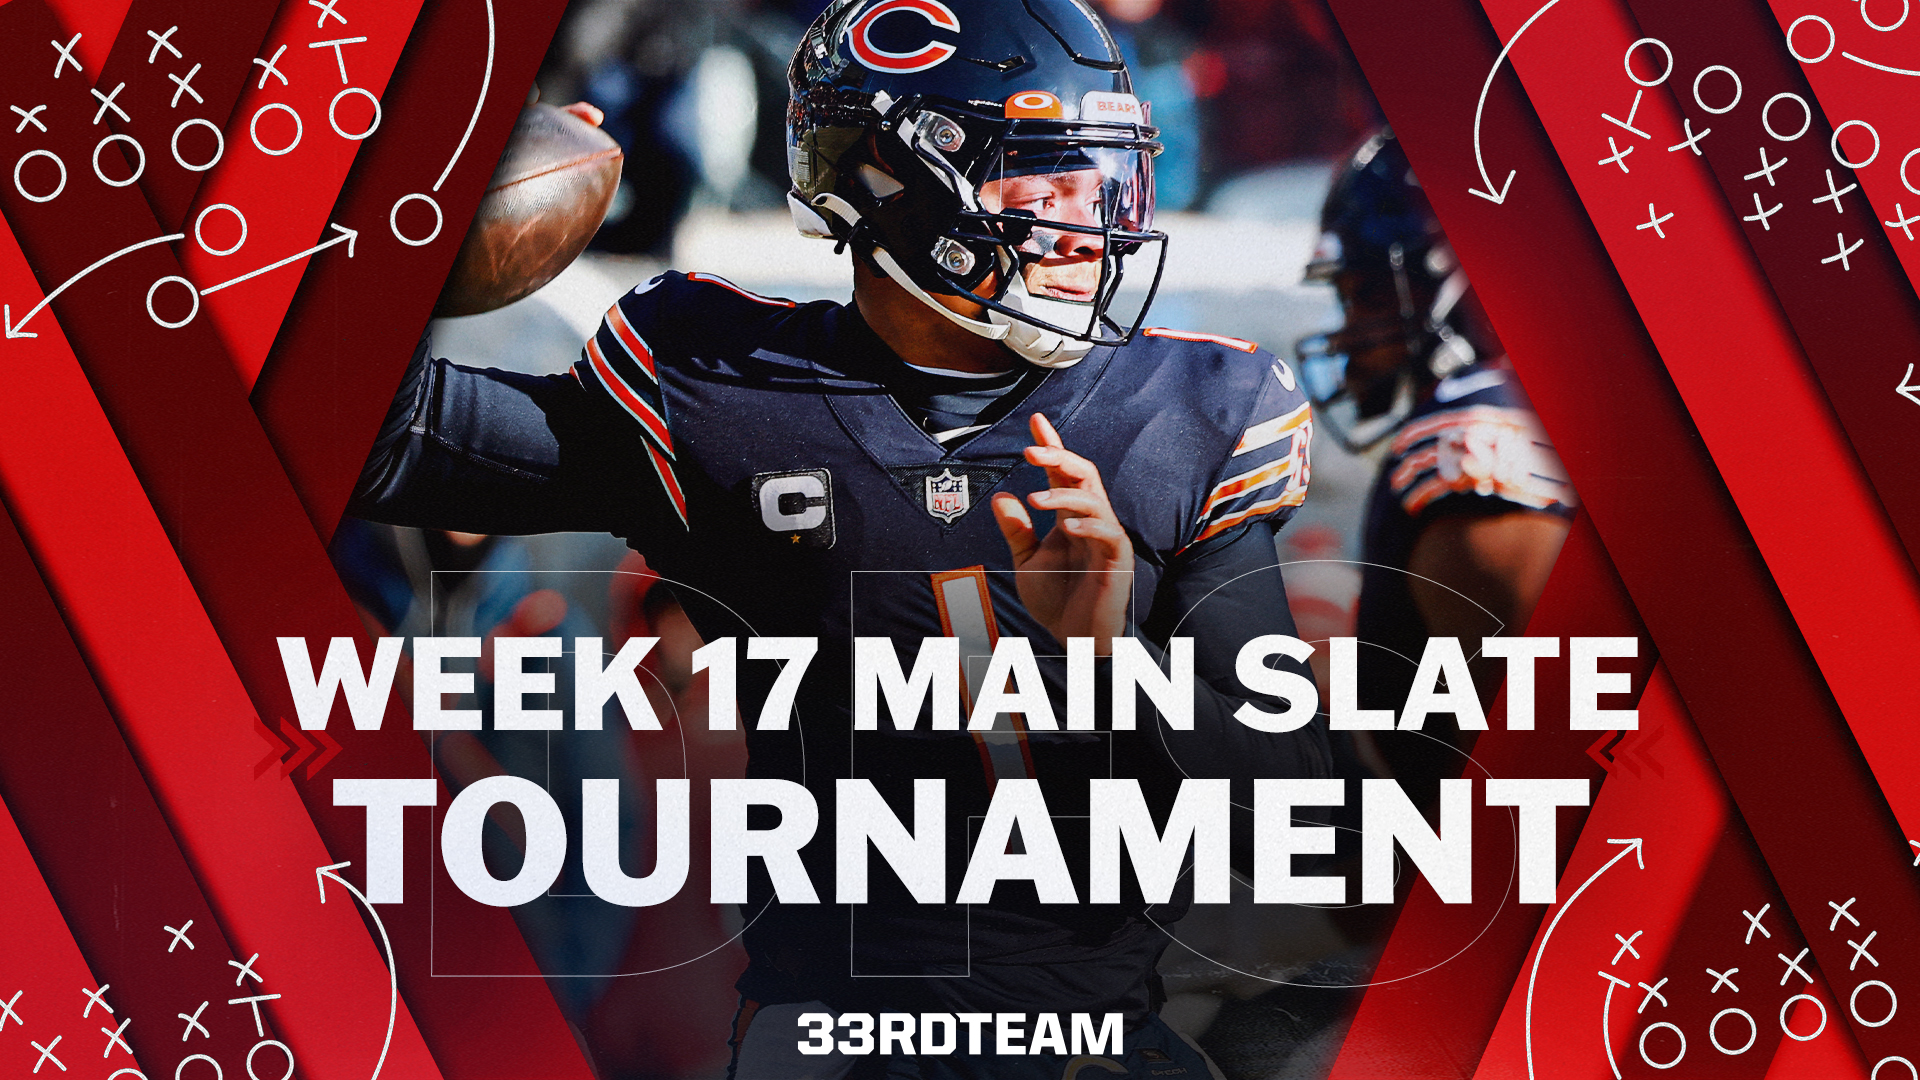 Week 17 DFS tournament style games